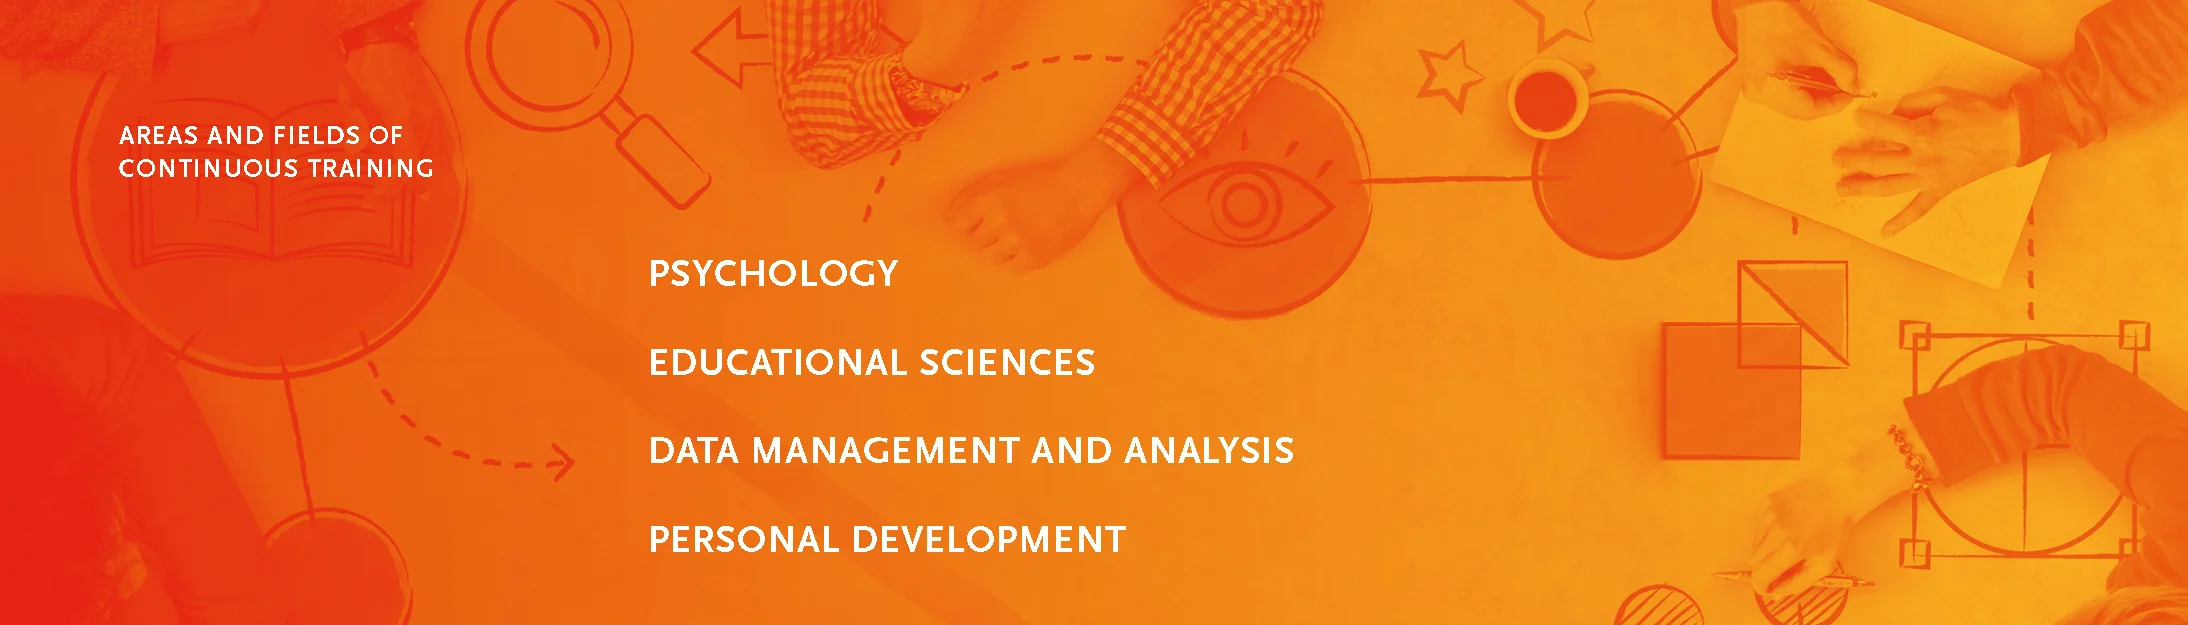 Areas and domains of lifelong learning: Psychology, Educational Sciences, Data Management and Analysis and Personal Development